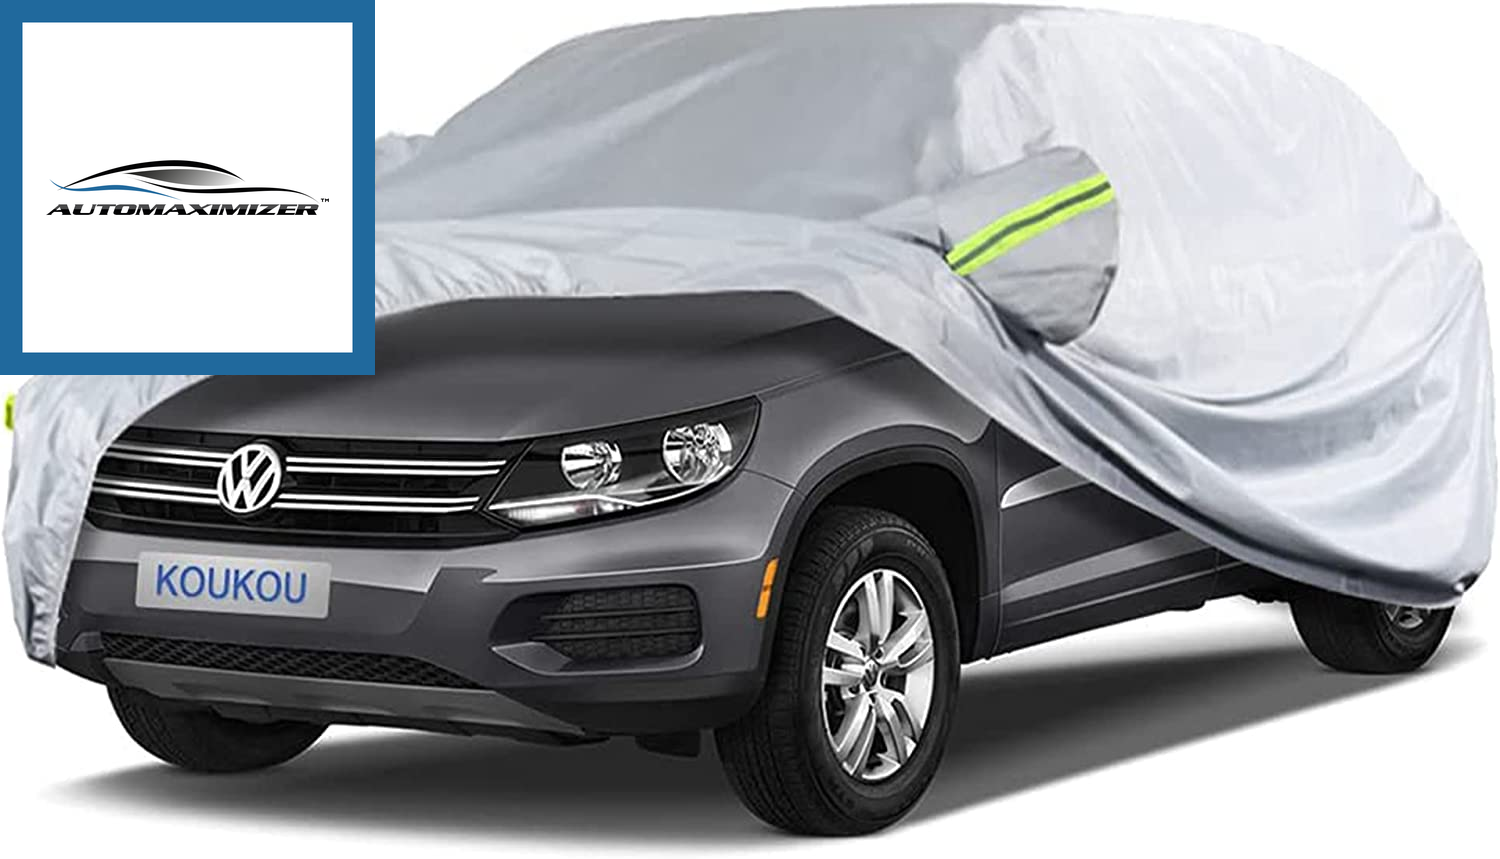 SUV Car Cover Custom Fit VW Tiguan from 2020 to 2022, Waterproof